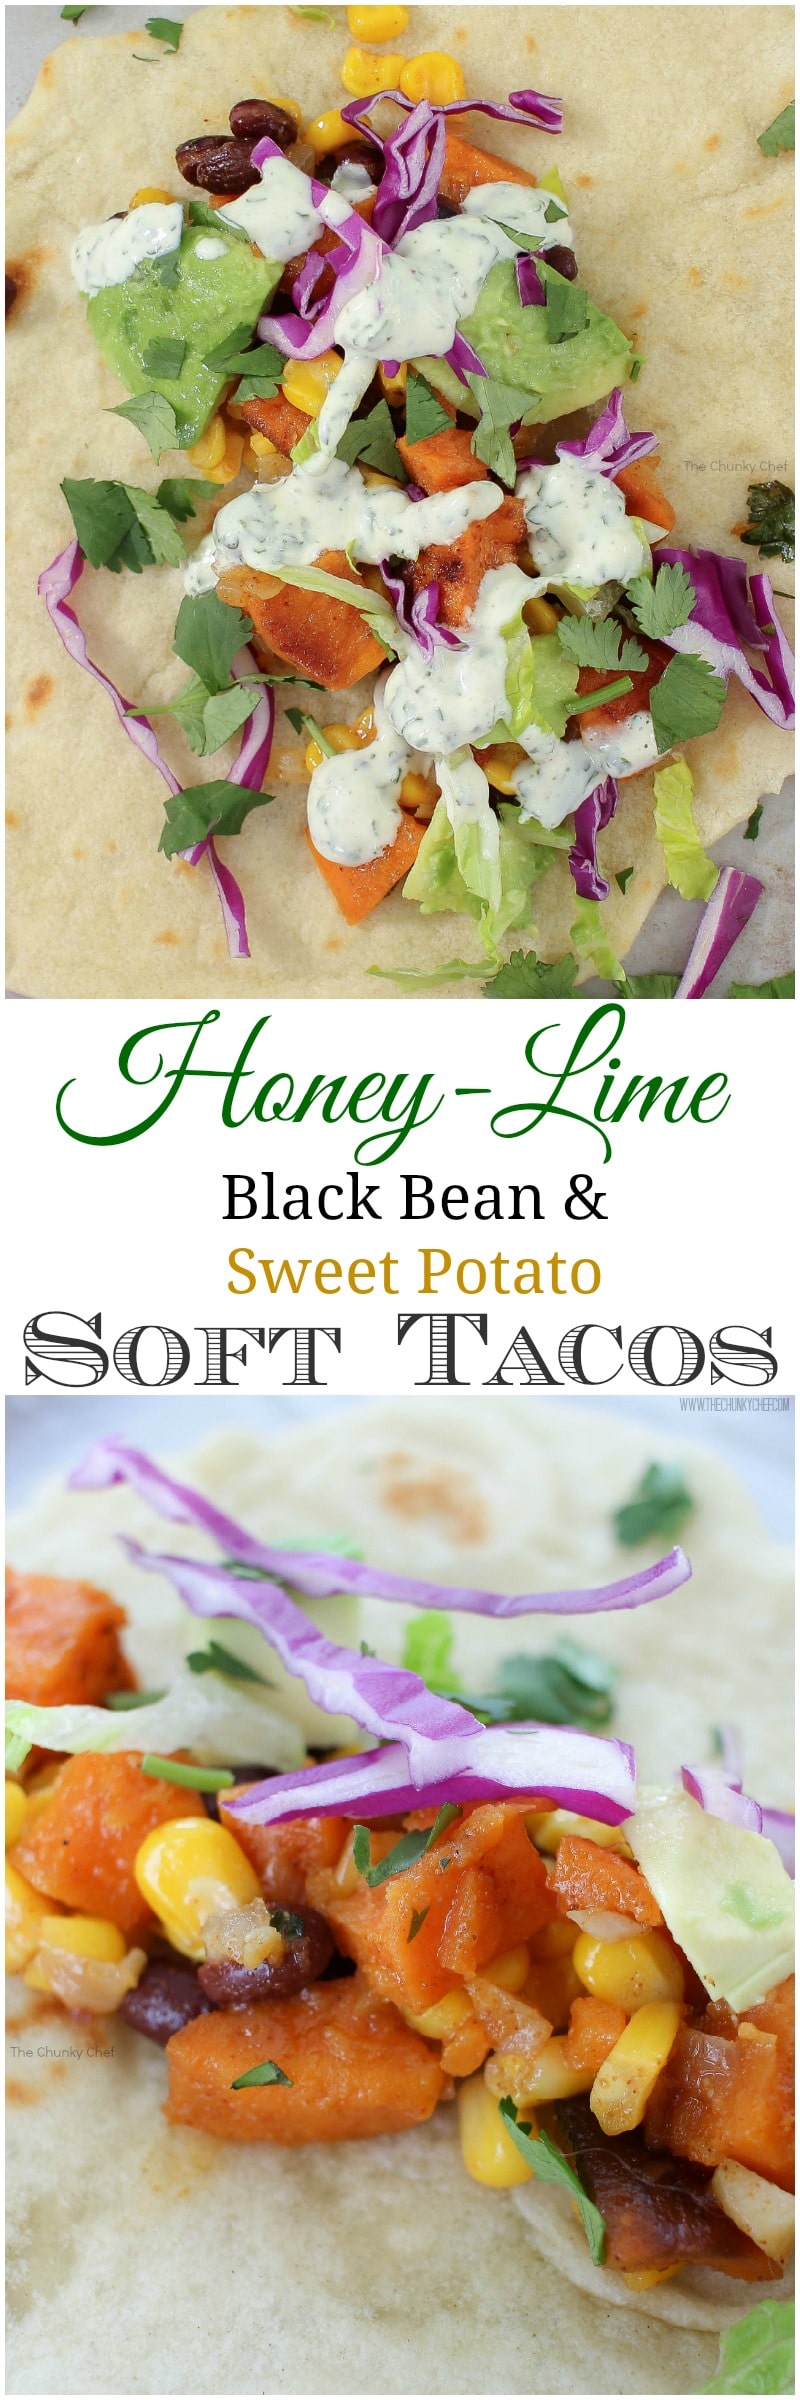 An absolutely delicious vegetarian soft taco that even meat-eaters will LOVE! Sweet potatoes mixed with protein packed black beans make these extra hearty!	